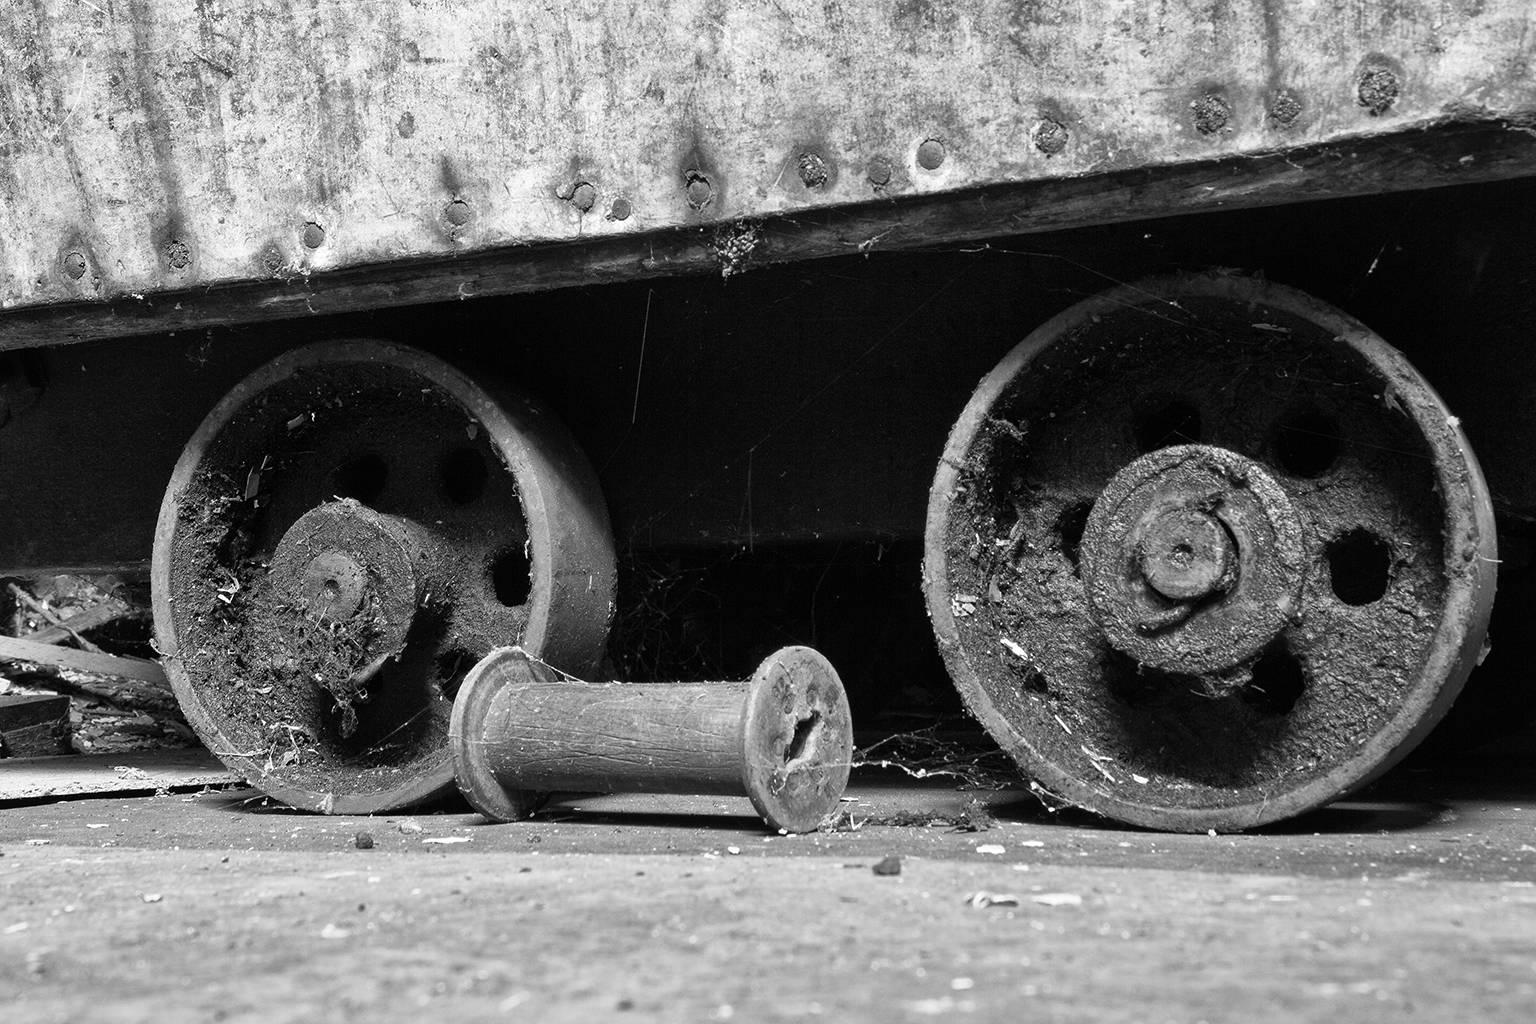 "Wheels", black and white, abandoned, silk mill, industrial, vintage, photograph